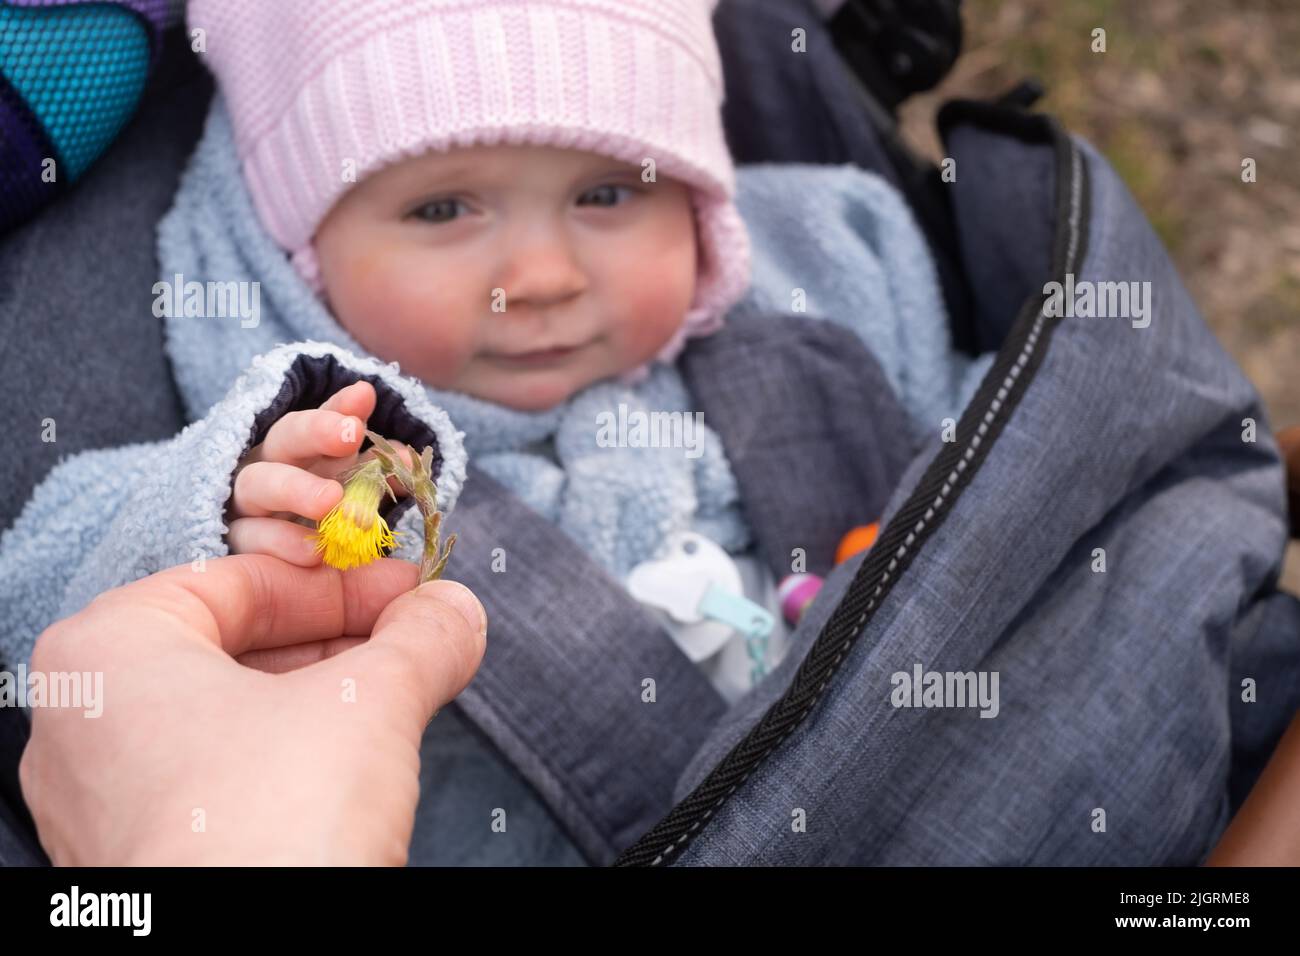 Mother giving a yellow flower to her child. Baby touching a flower for first time in life Stock Photo